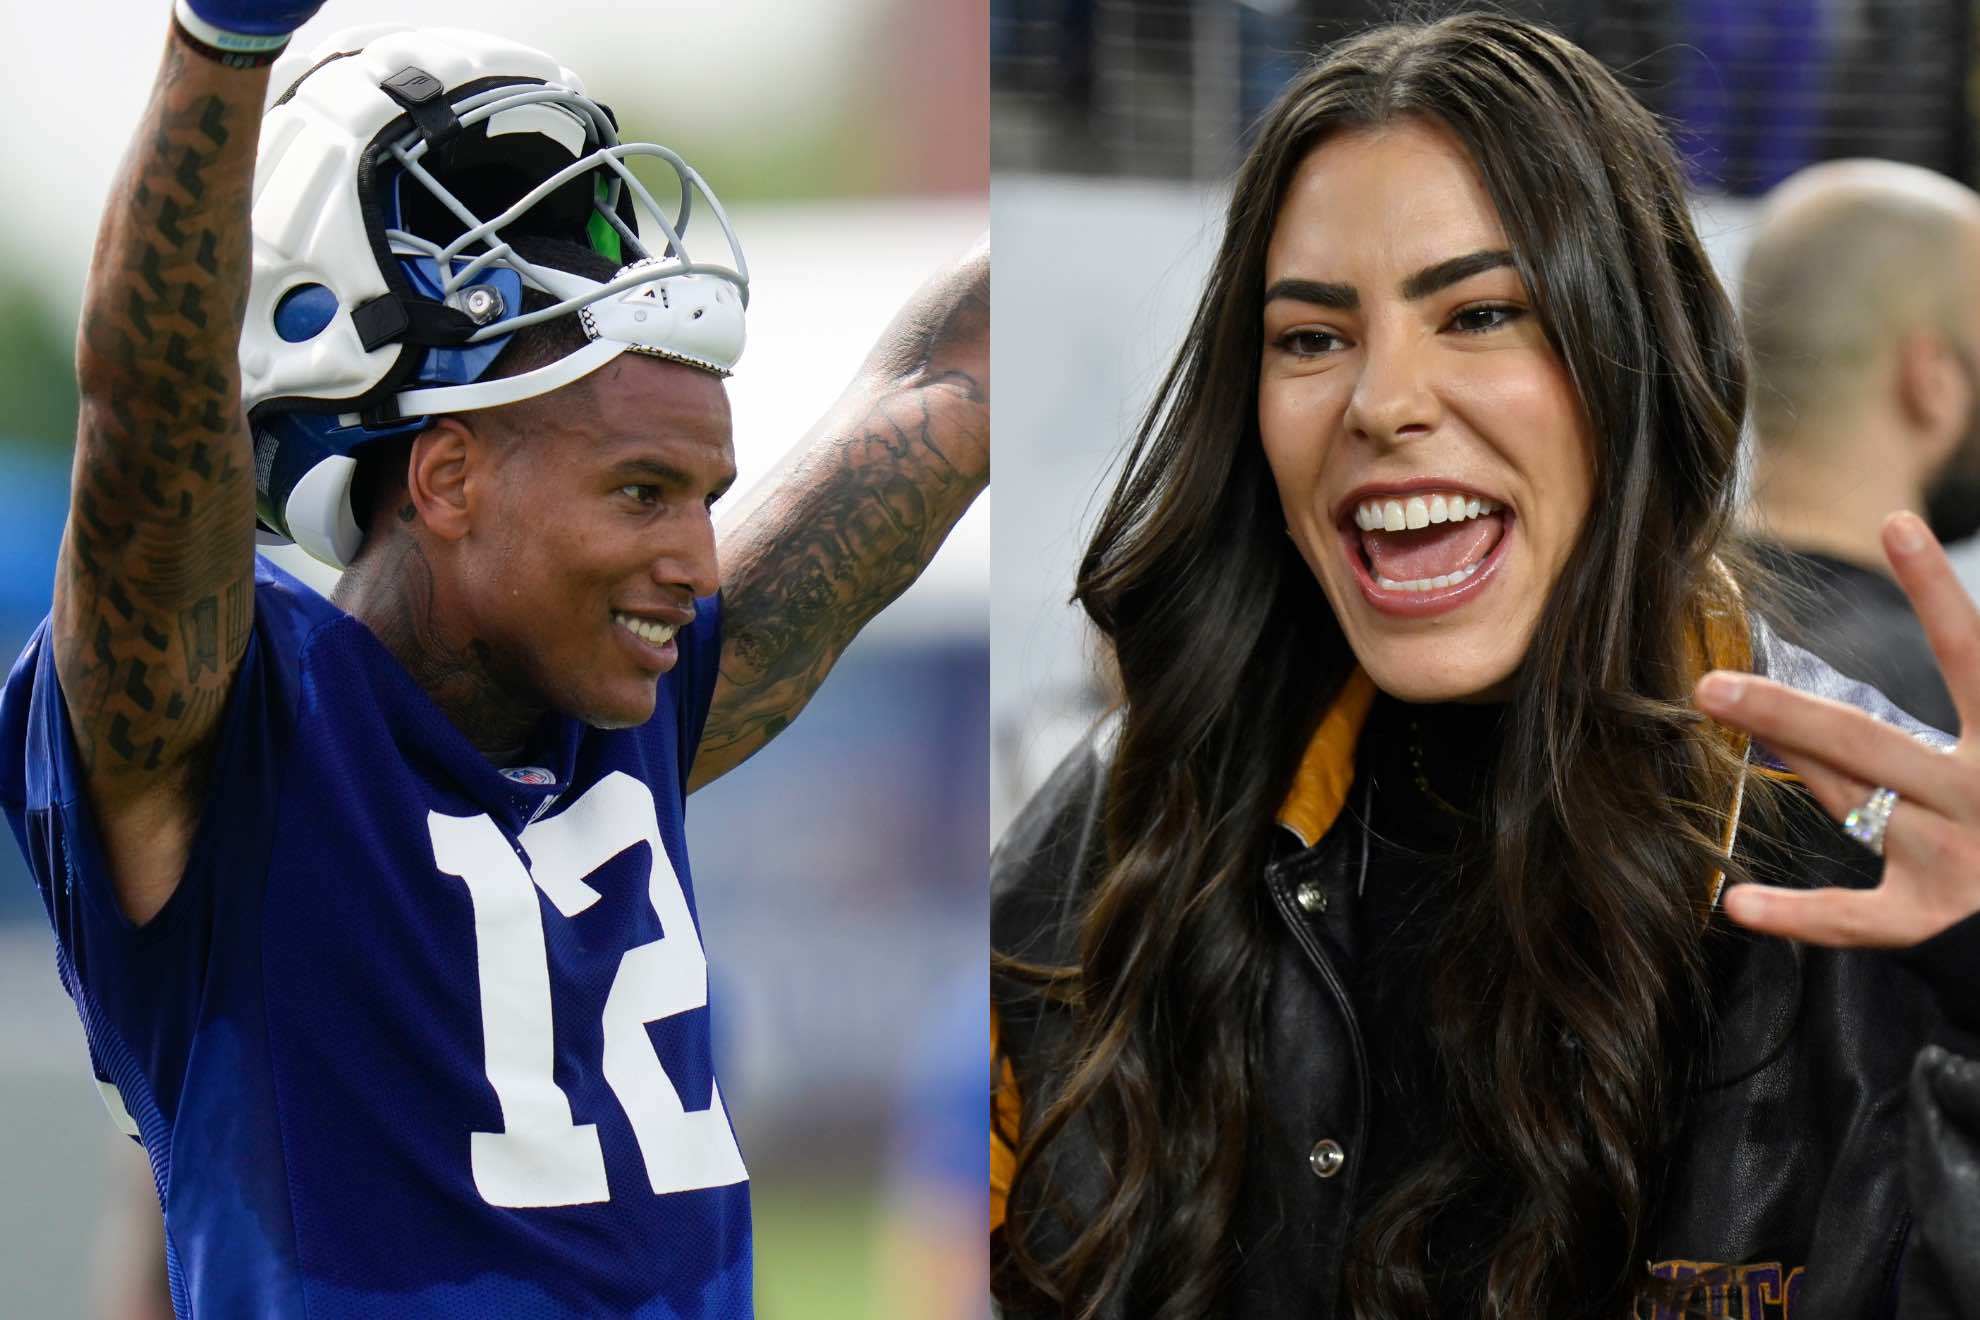 Darren Waller and Kelsey Plums relationship appears to be over